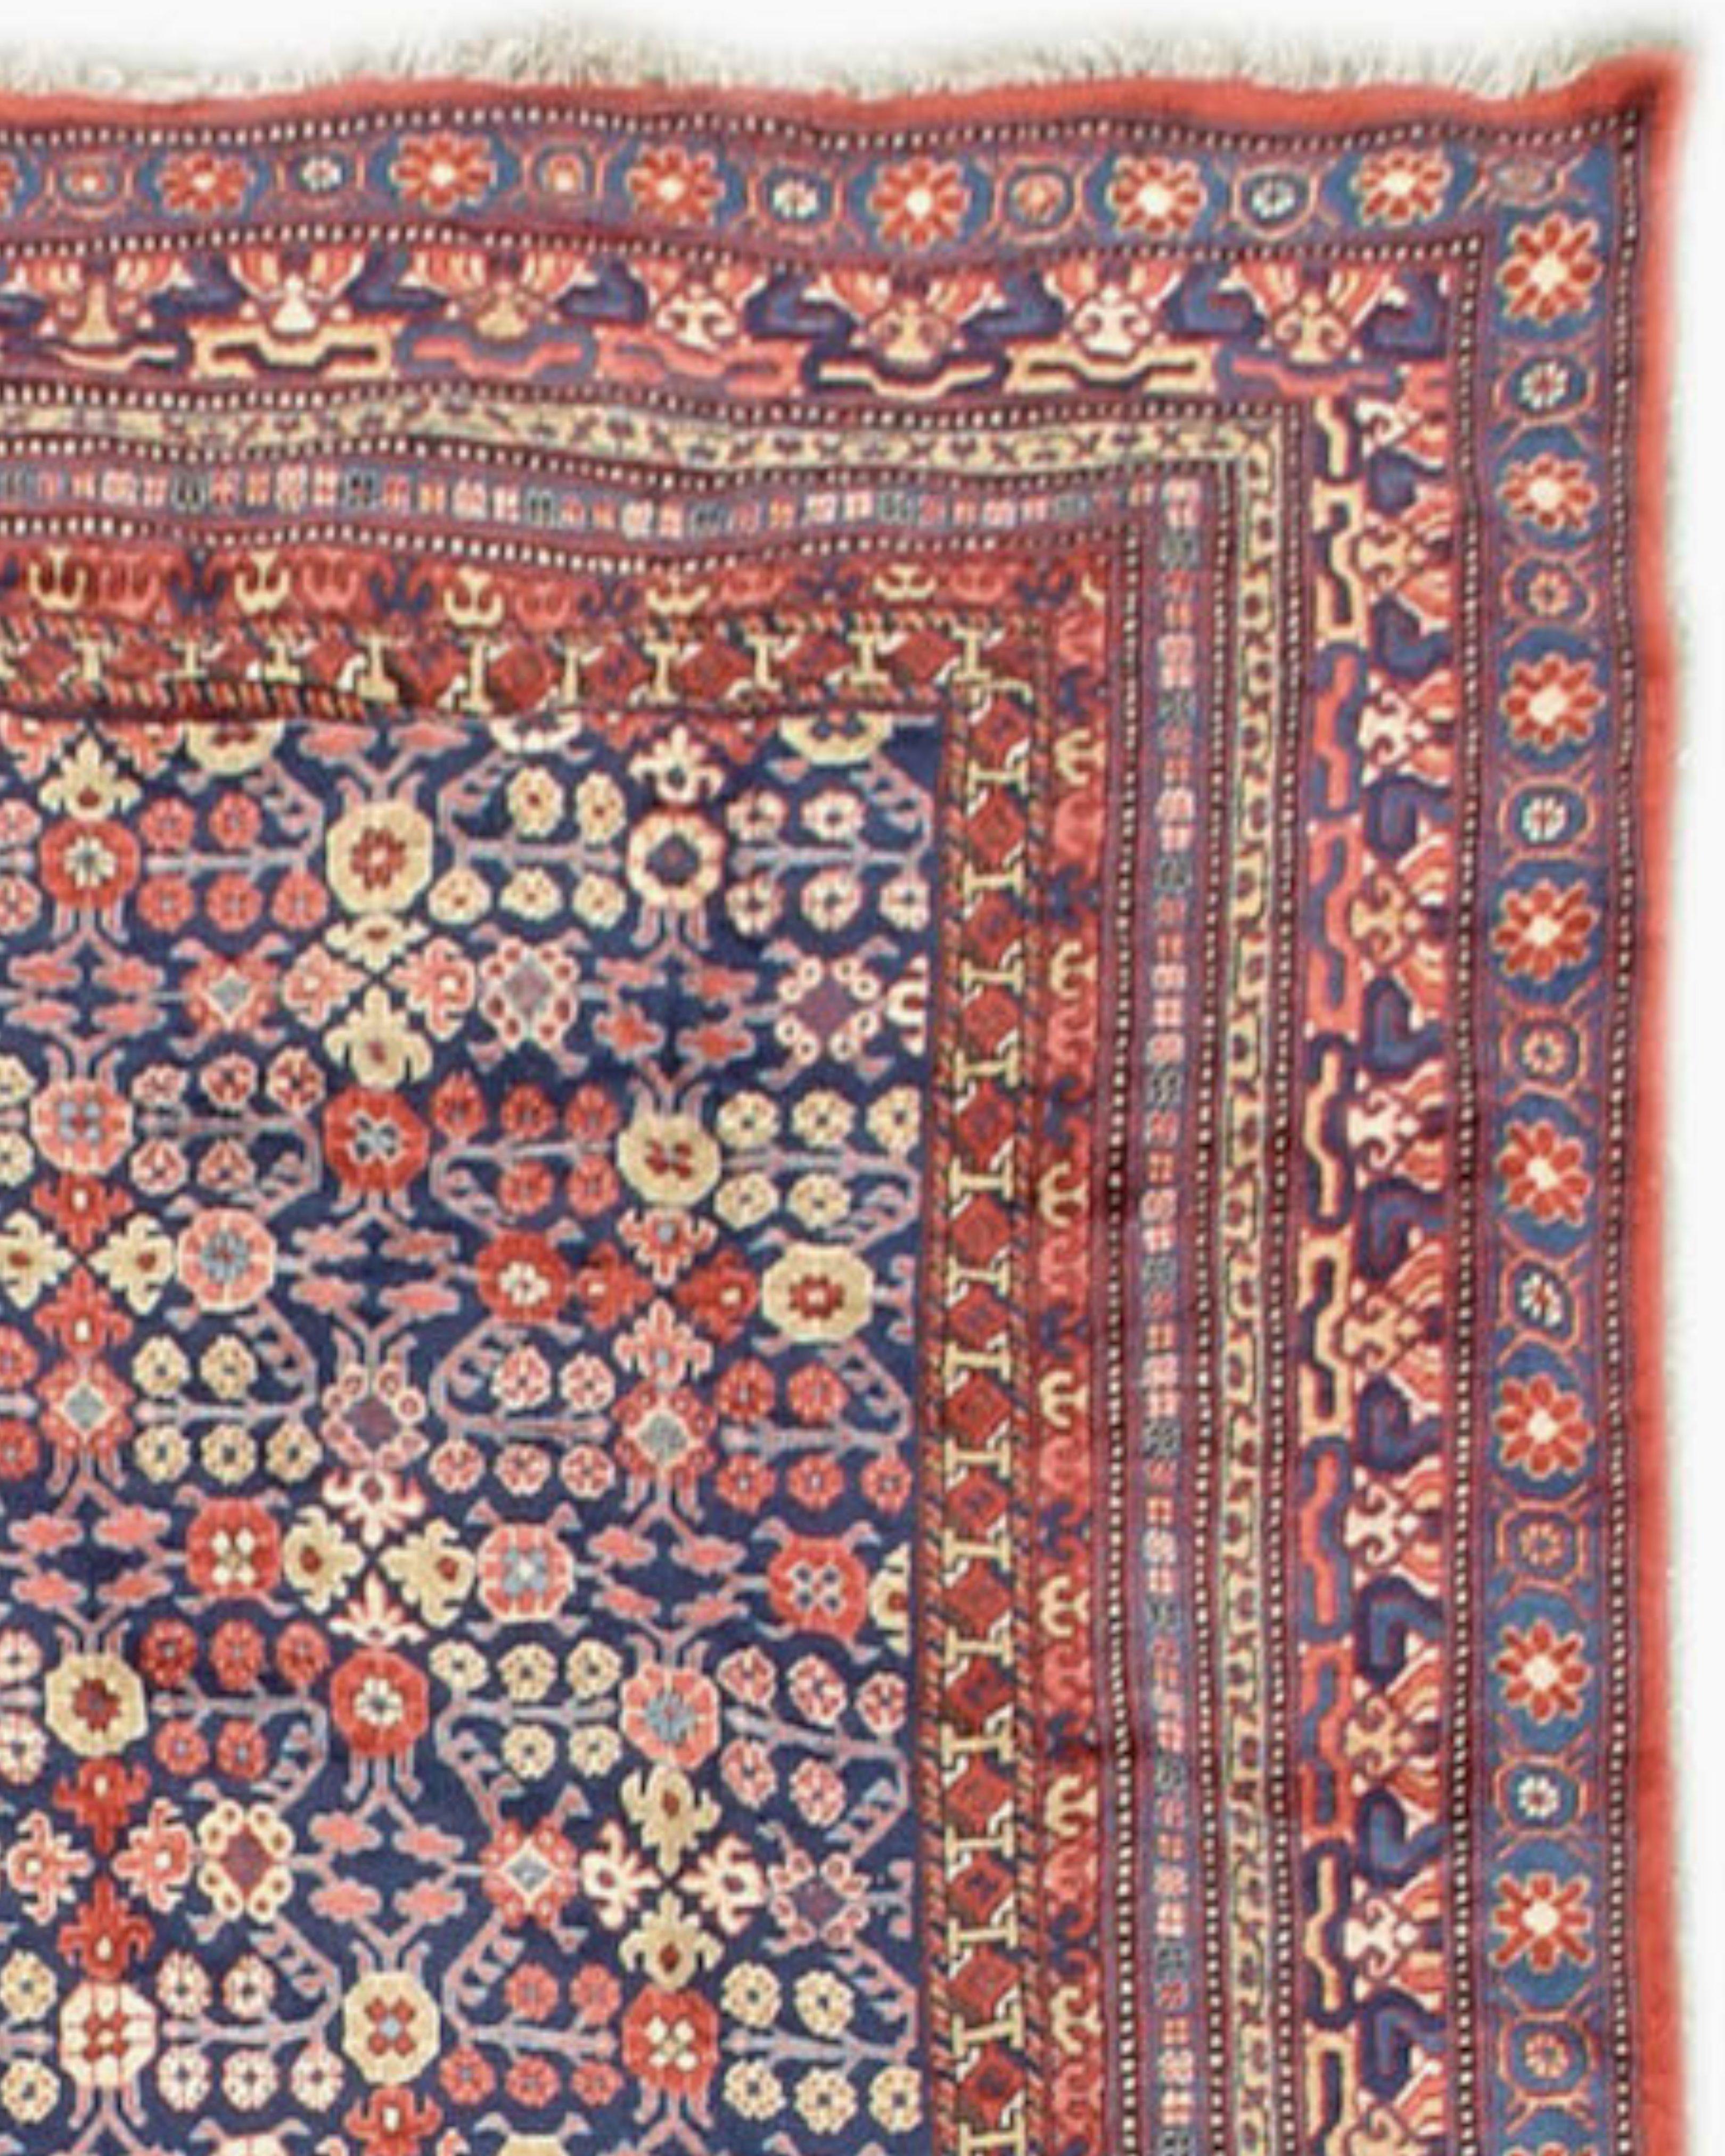 Antique Kashgar Rug, Early 20th Century

Kashgar, an ancient Silk Road oasis town in the Tarim Basin, is currently located in the far west of the Xinjiang Uyghur Autonomous Region of China near the border with two Central Asian Republics. The people